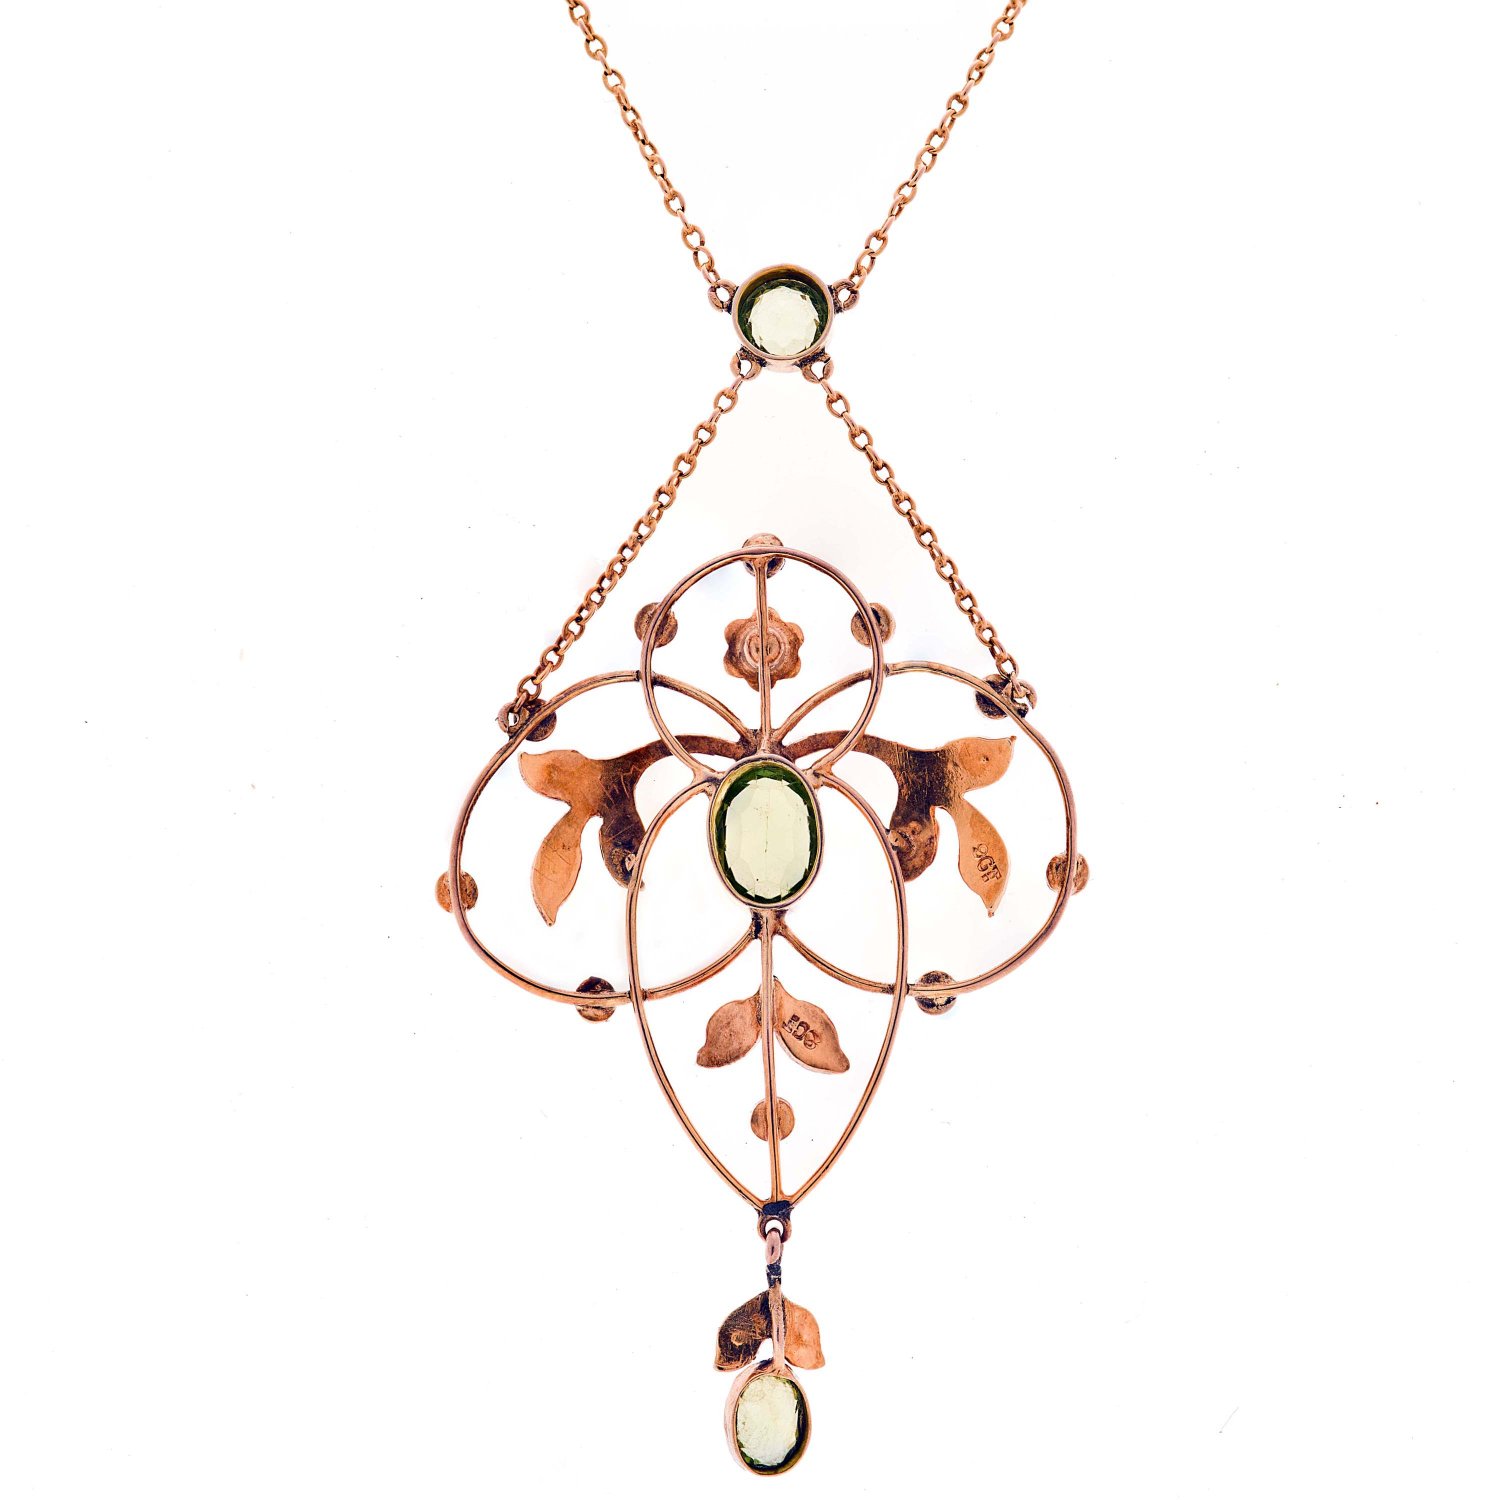 9ct Gold Art Nouveau 3 Peridot and Pearl Necklace [G597]